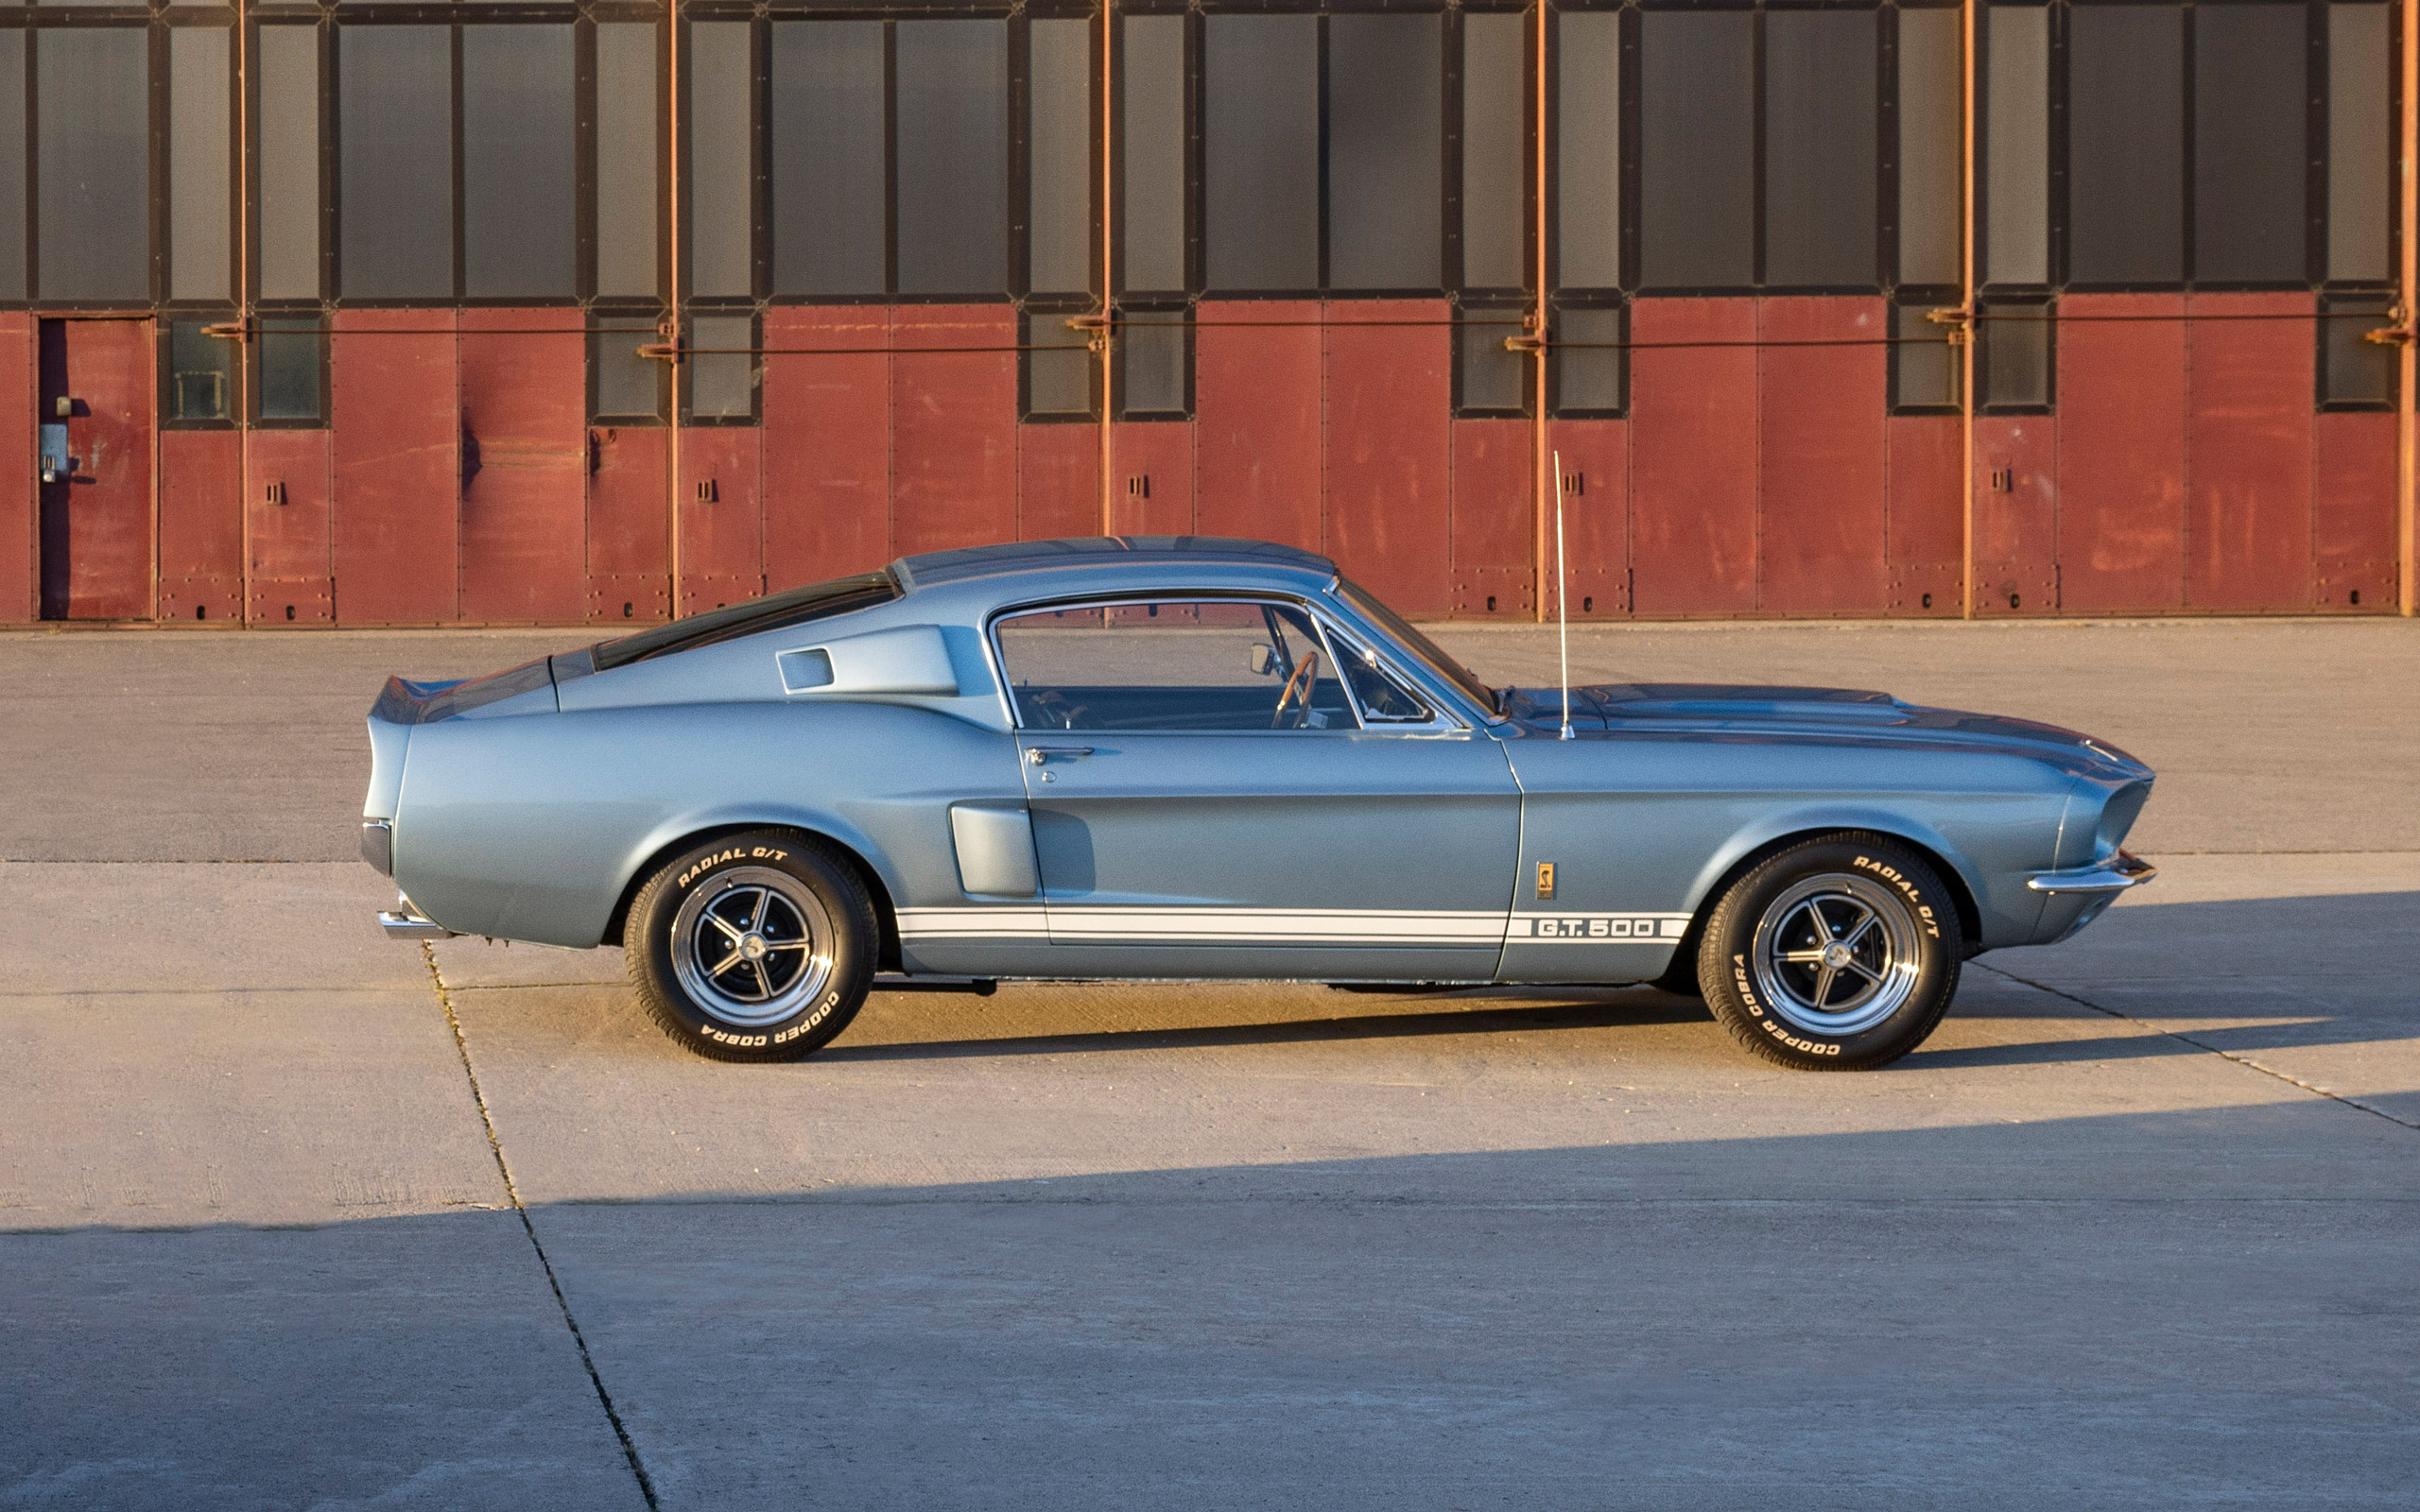  1967 Ford Shelby Mustang GT500 Wallpaper.